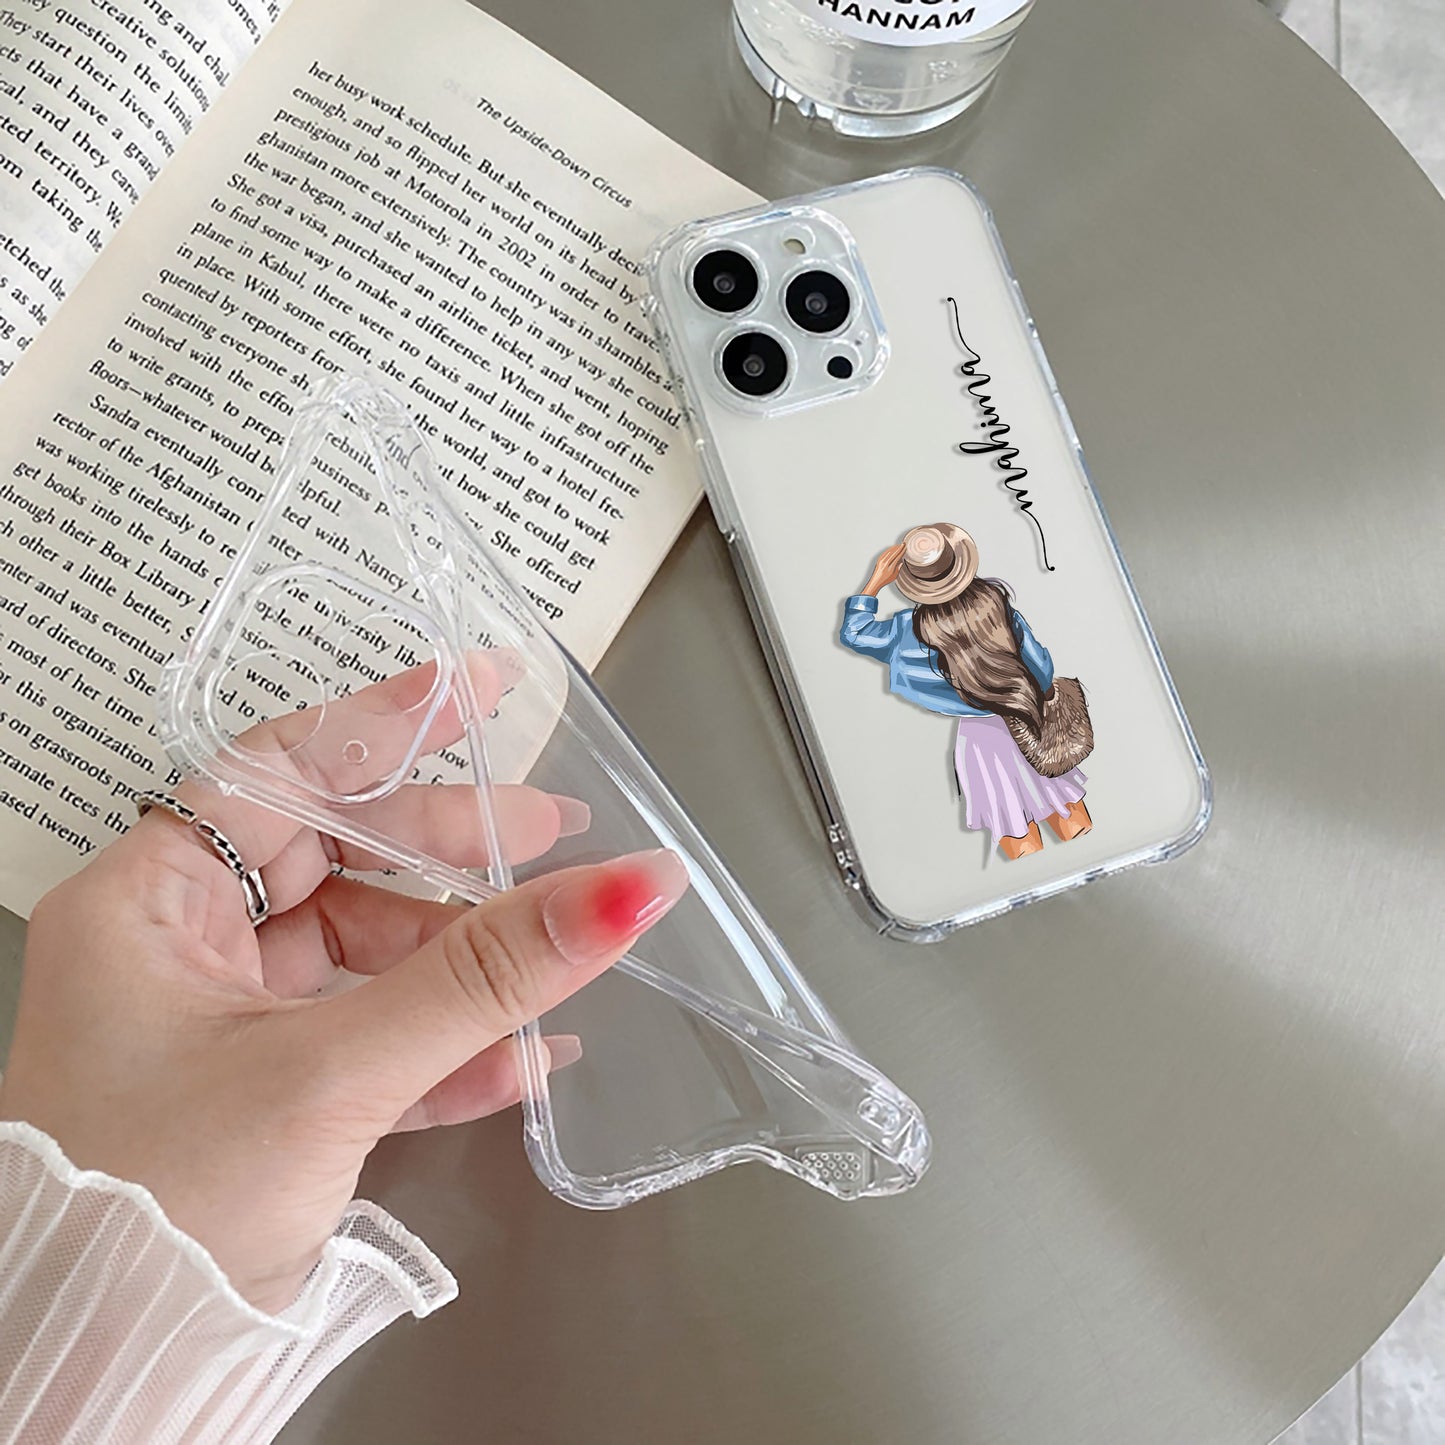 Girl With Hat Customize Transparent Silicon Case For Redmi/Xiaomi